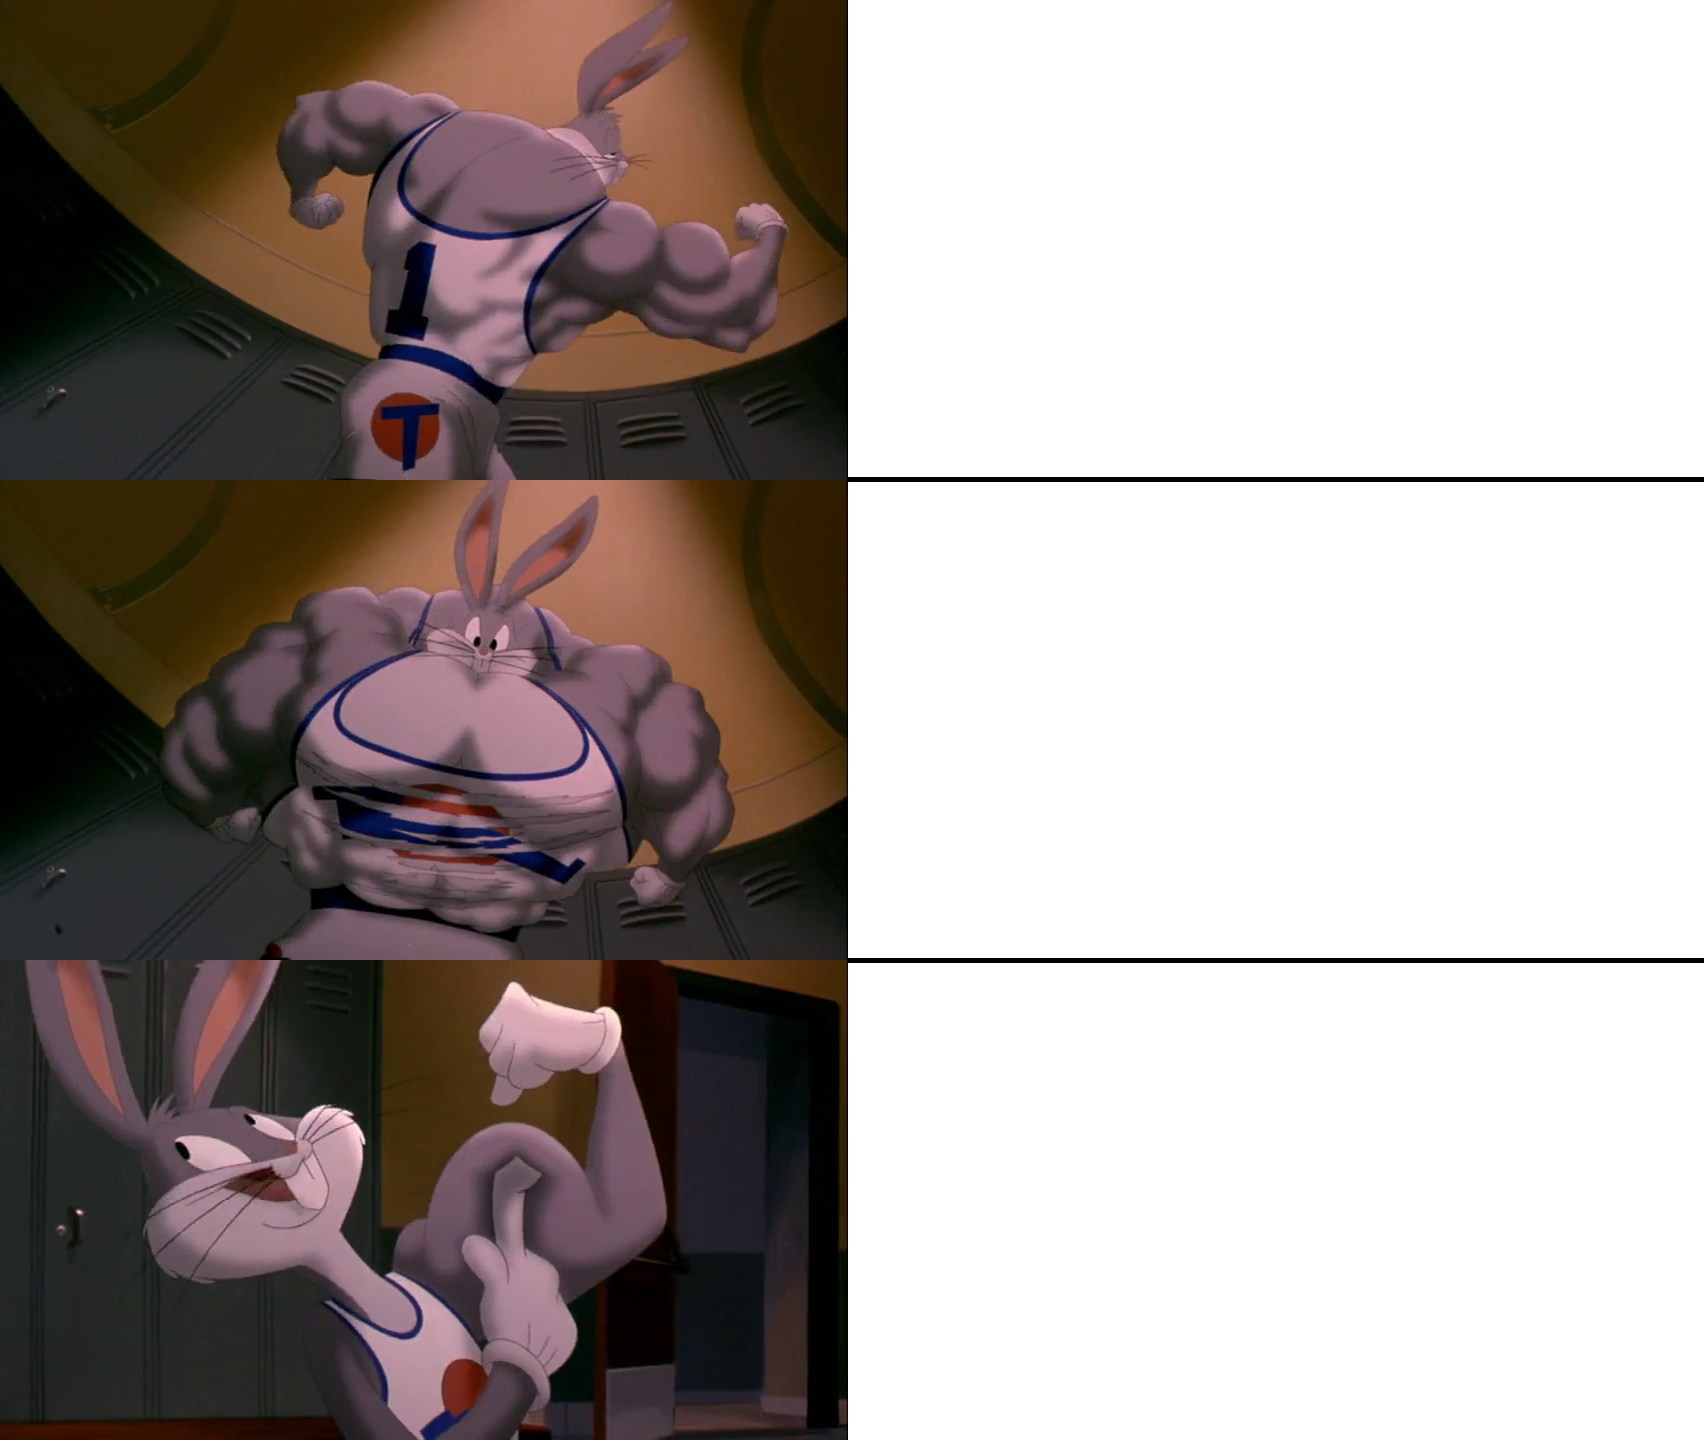 High Quality Bugs Bunny Muscle evolution Blank Meme Template